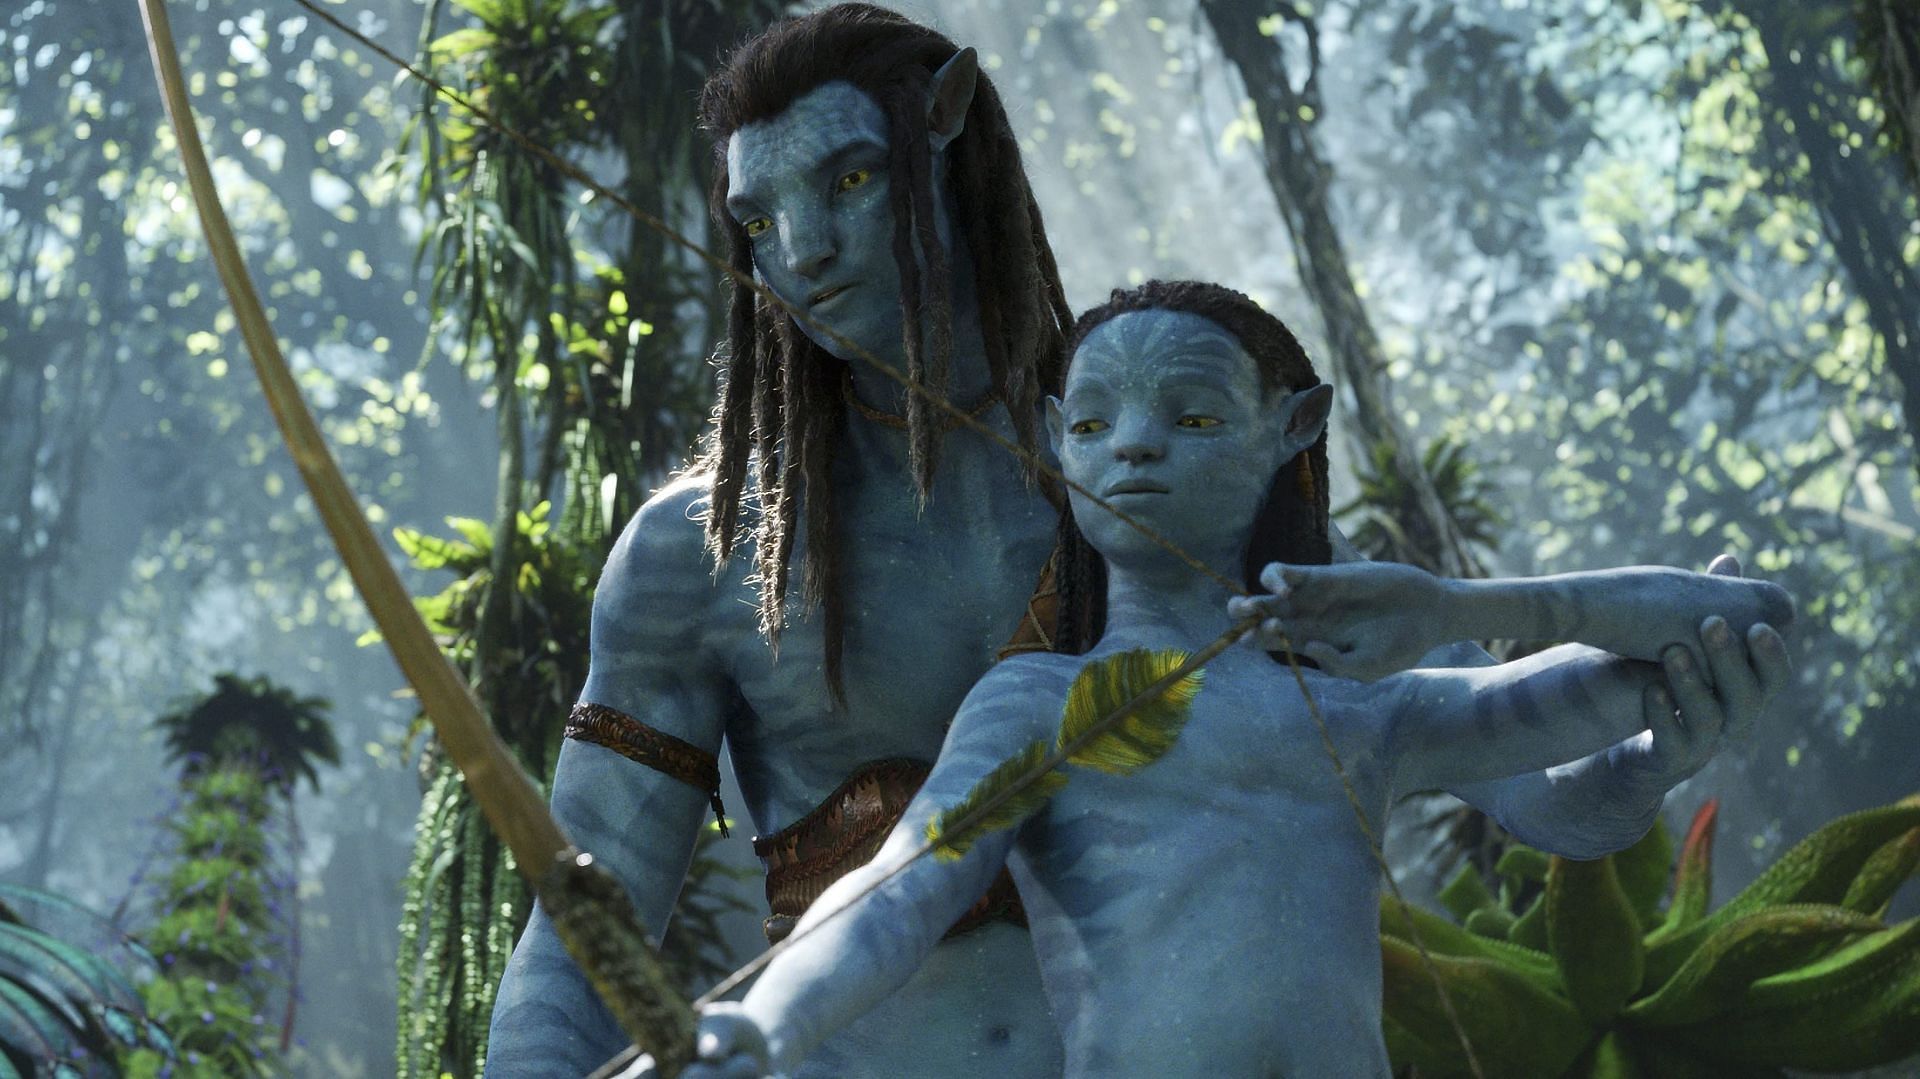 Avatar: The Way of Water sails to new heights at the box office (Image via 20th Century Studios)